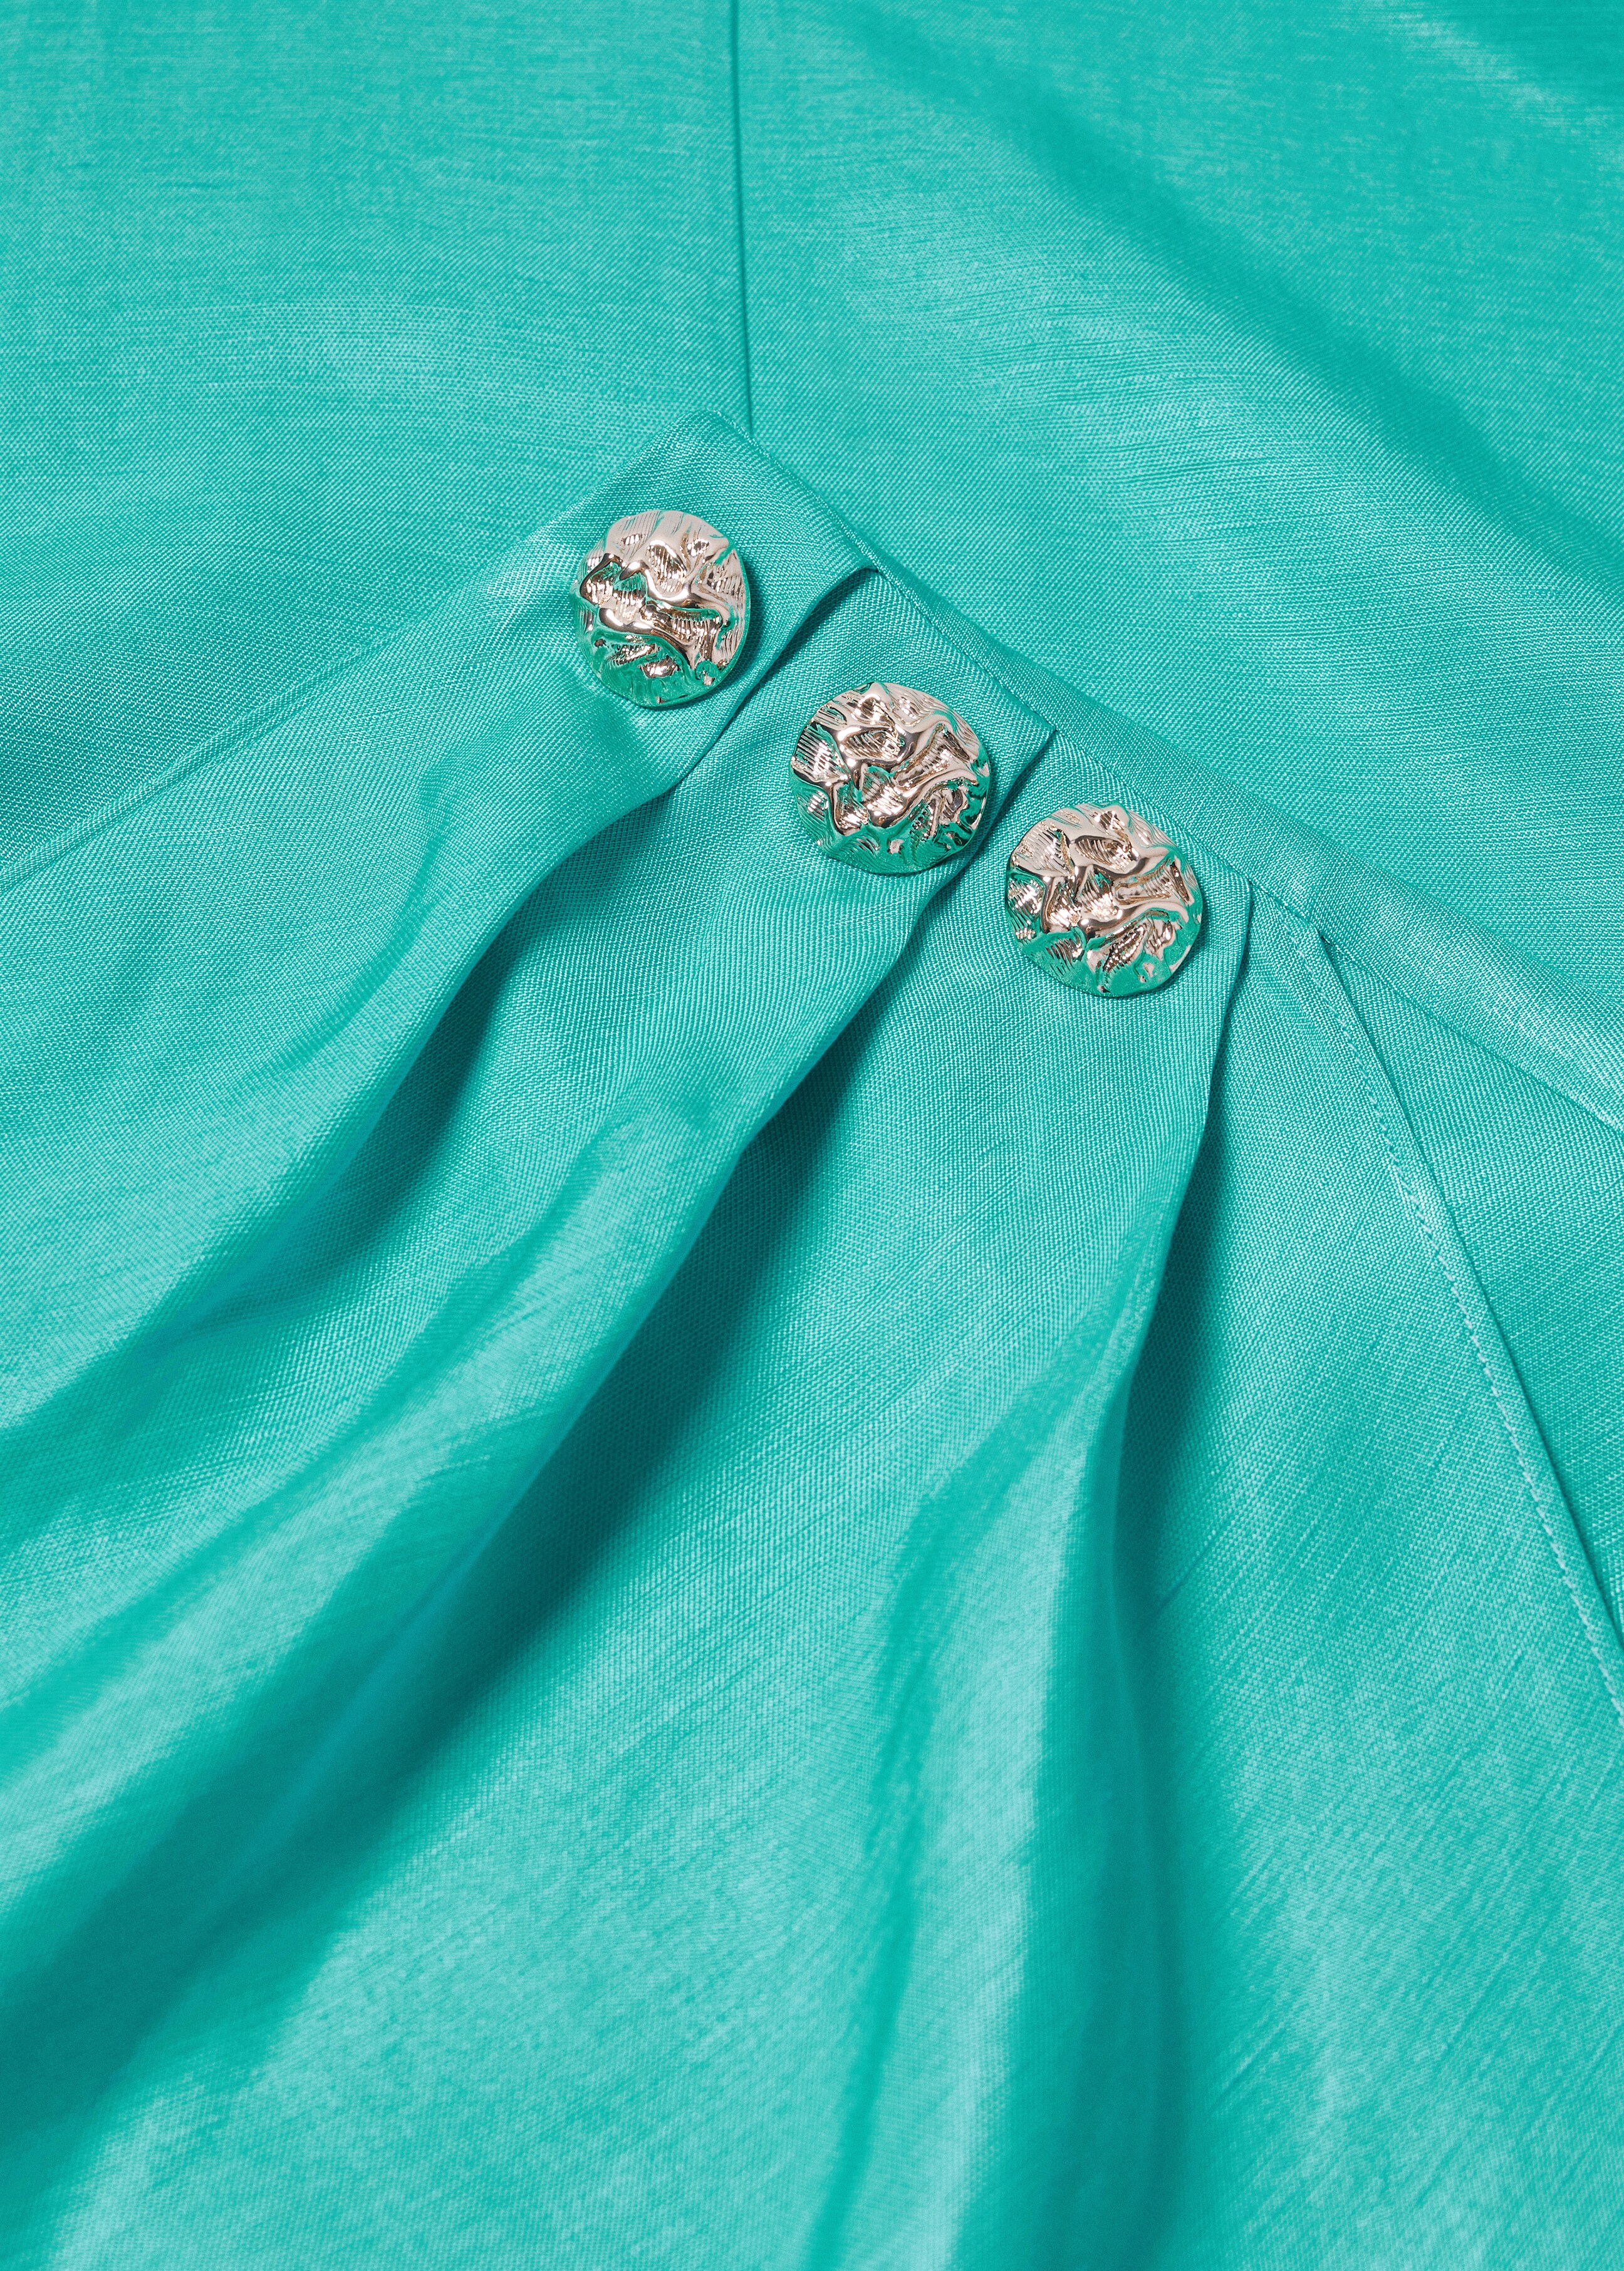 Jewel button skirt - Details of the article 8